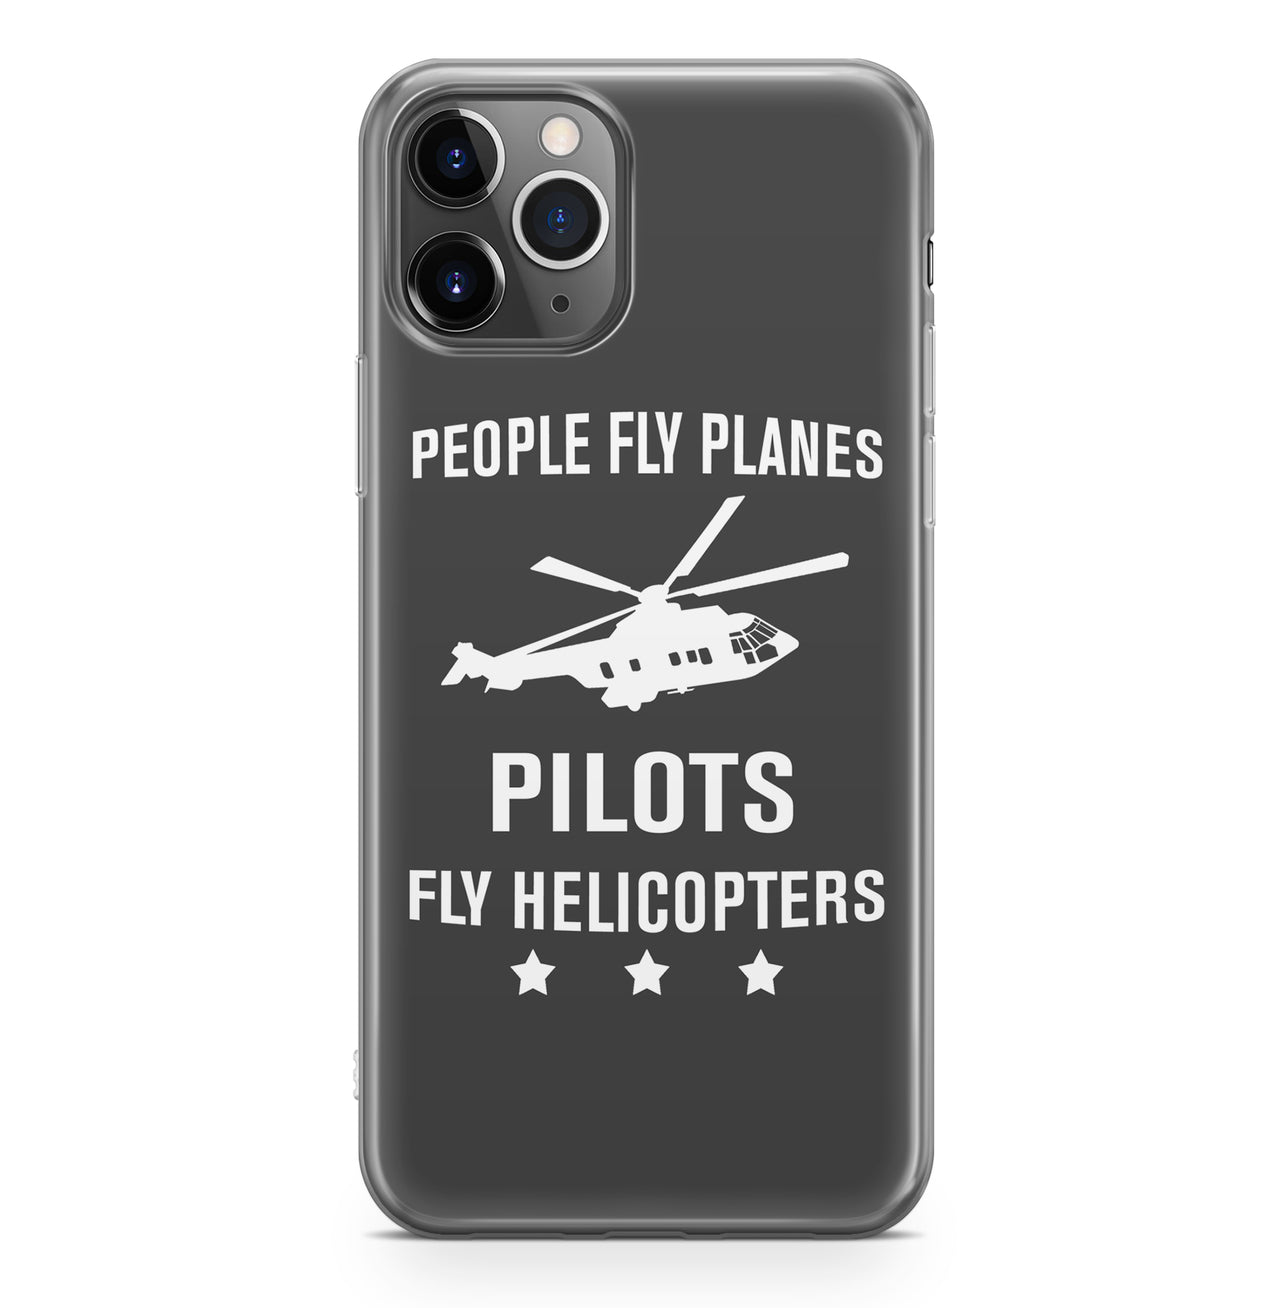 People Fly Planes Pilots Fly Helicopters Designed iPhone Cases